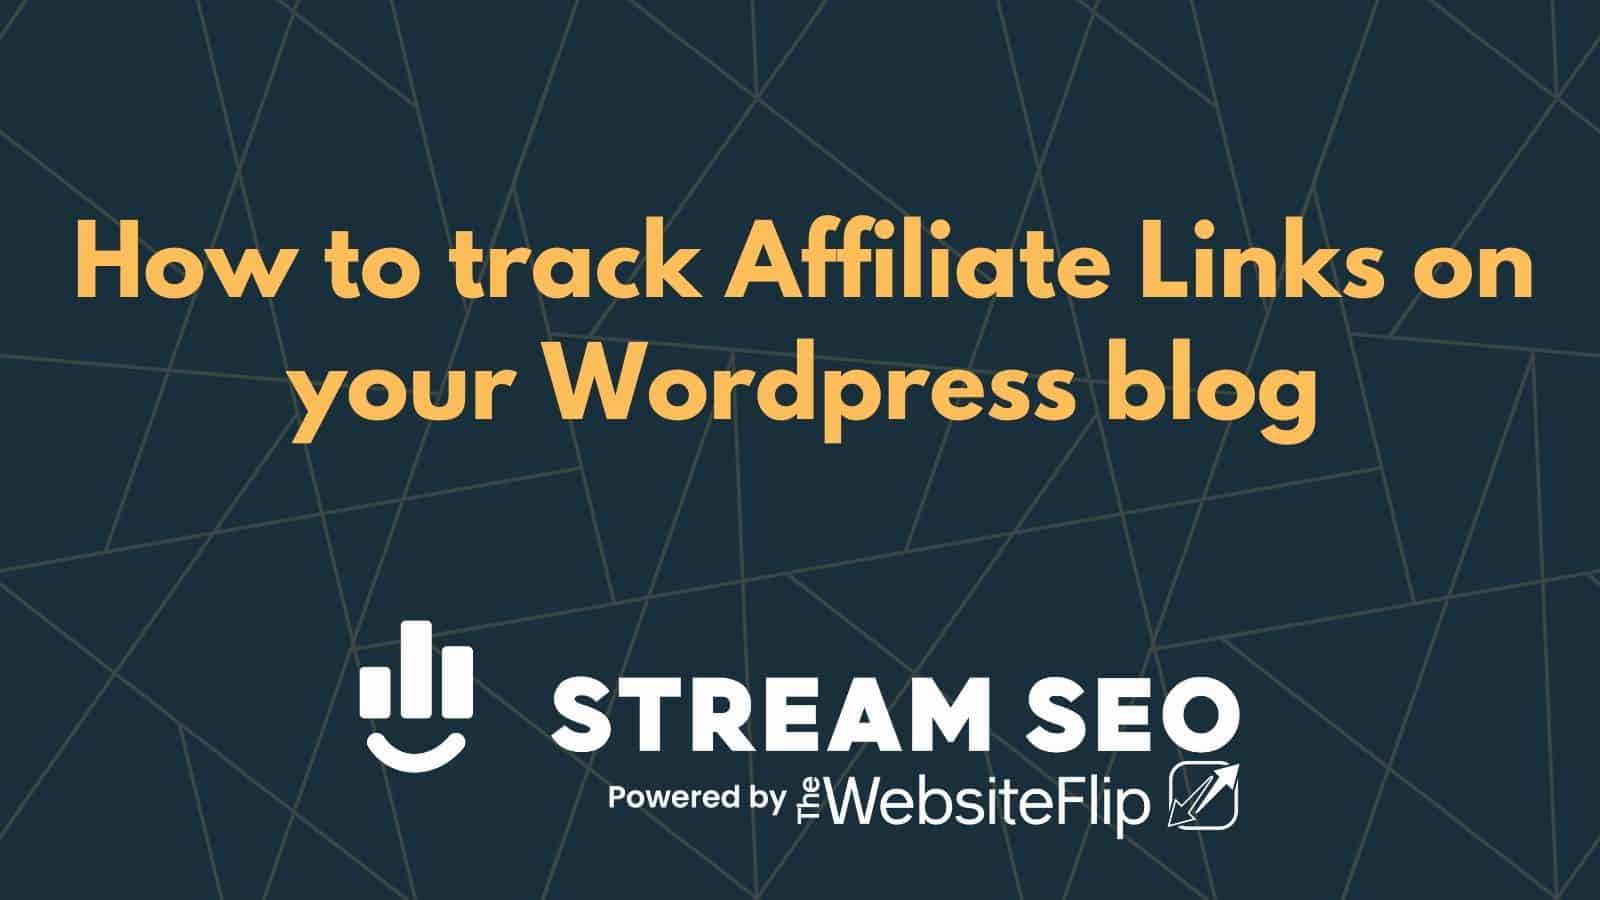 How to track Affiliate Links on your Wordpress blog